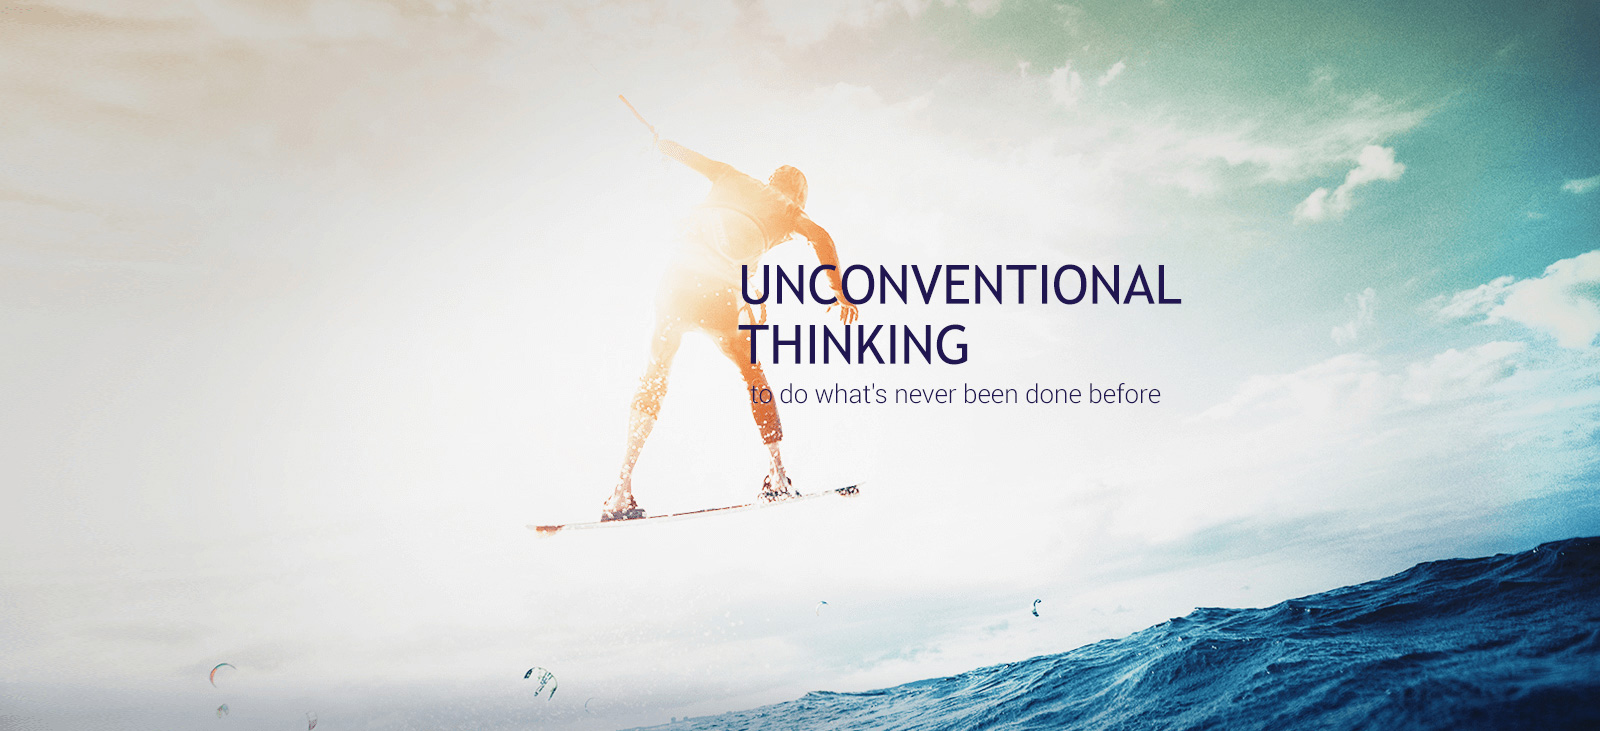 Unconventional Thinking - to do what's never been done before